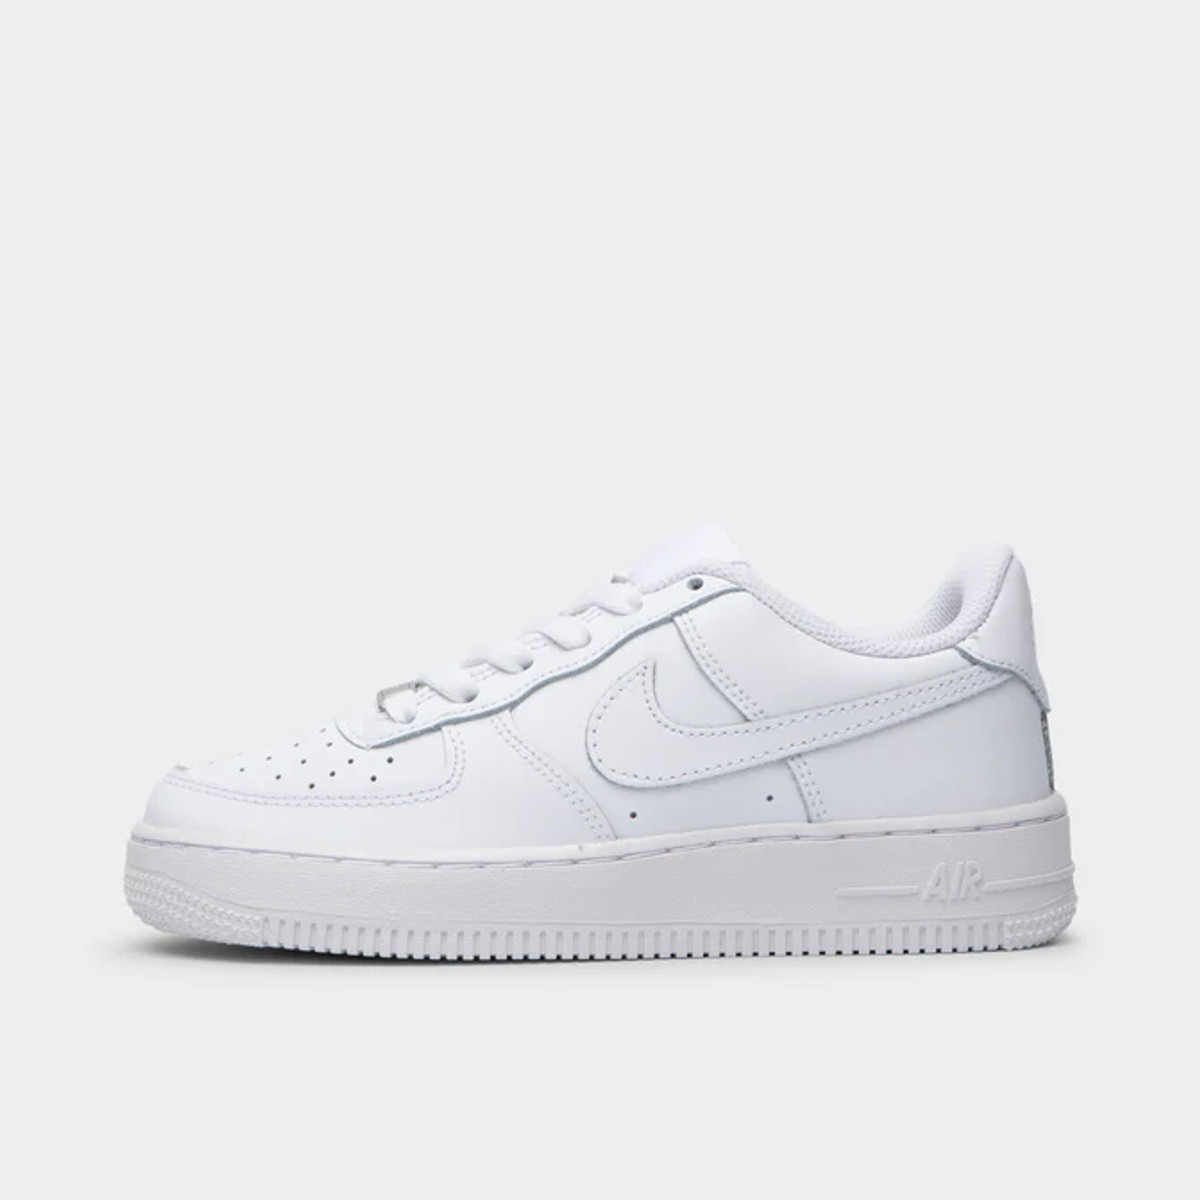 NIKE AIR FORCE 1 LOW 'WHITE'